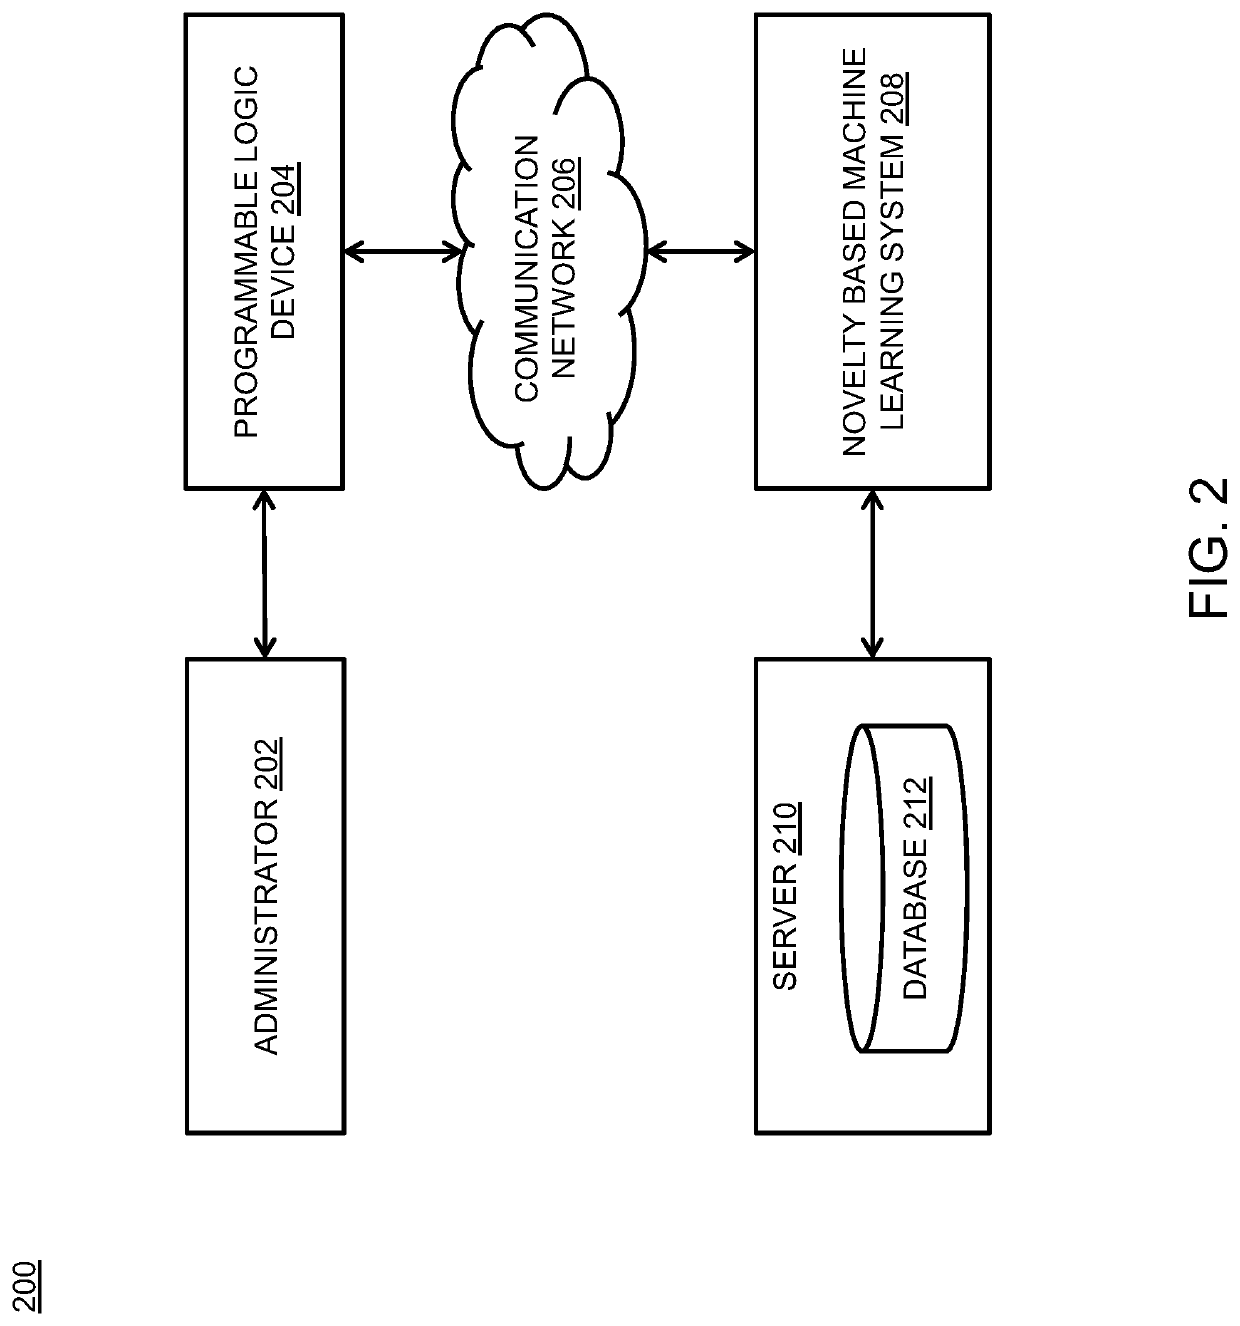 Method and system for enhancing training data and improving performance for neural network models